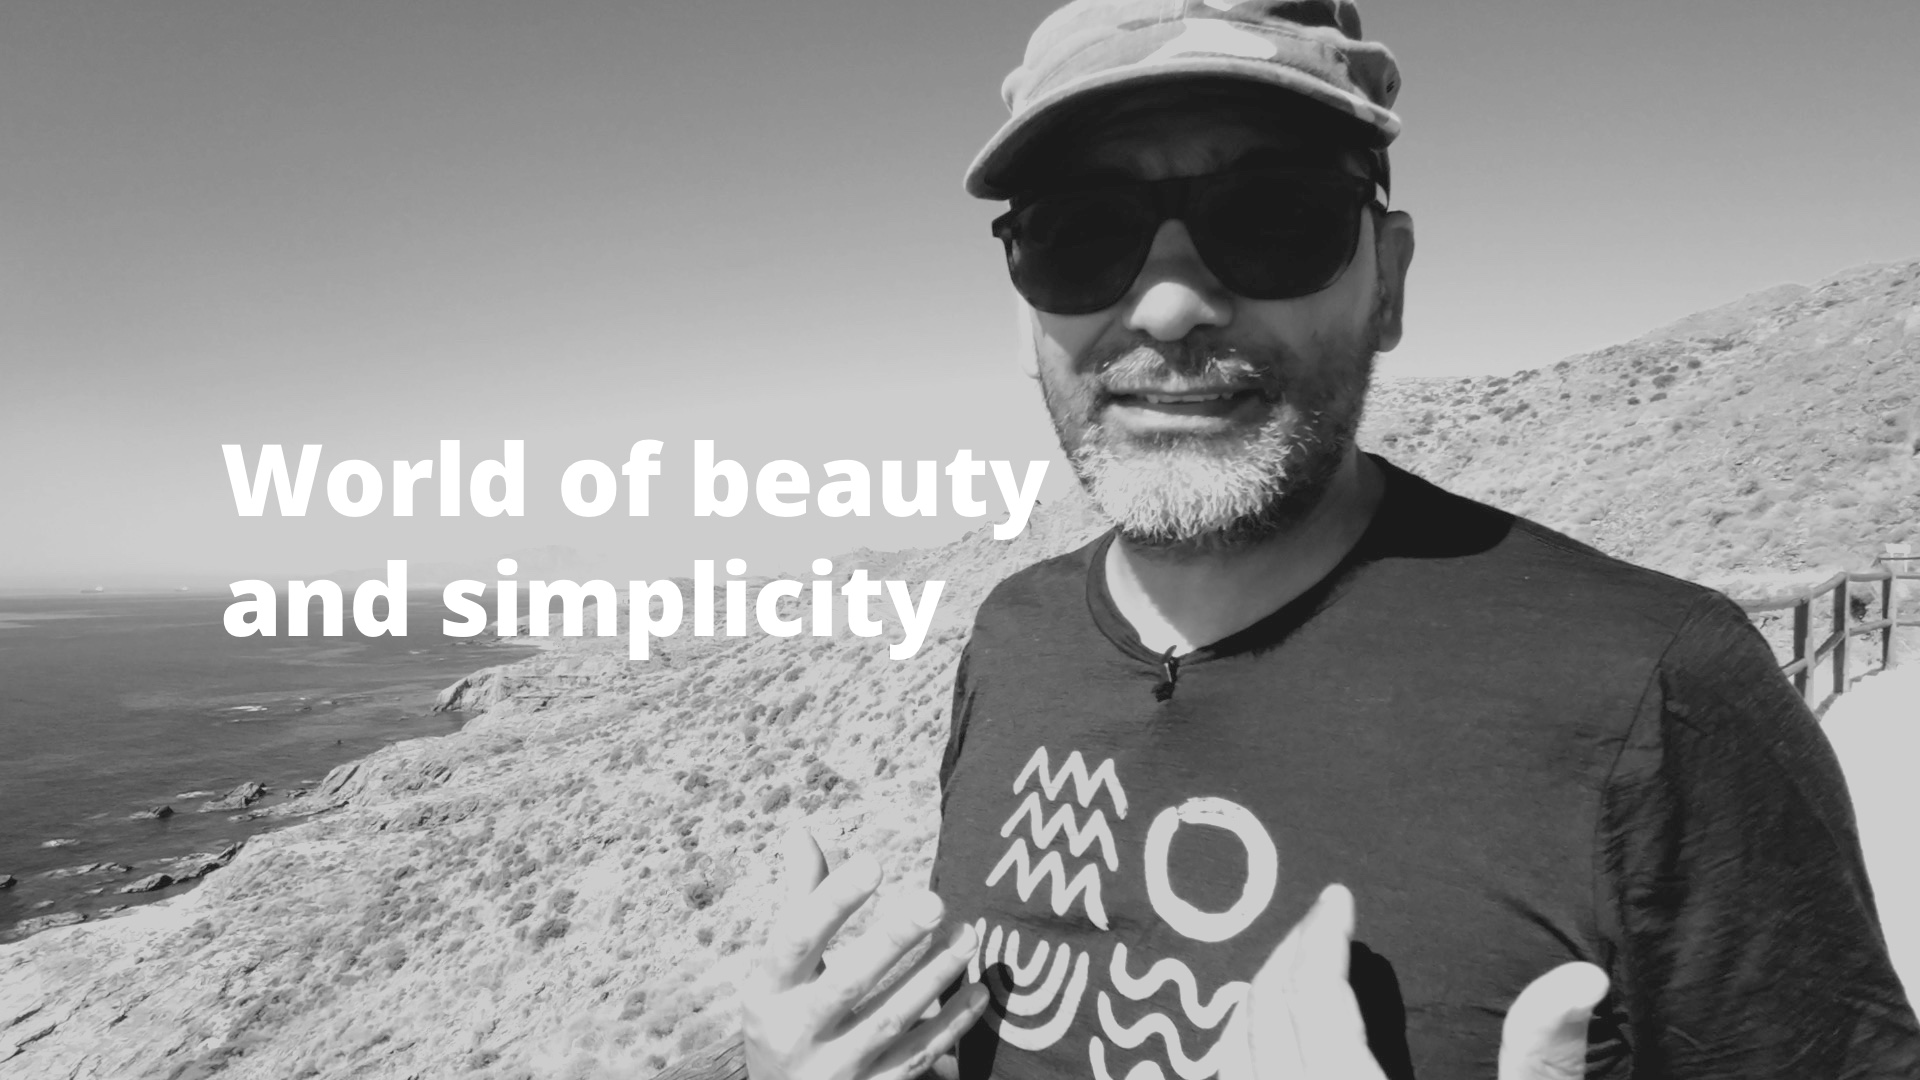 World of beauty and simplicity